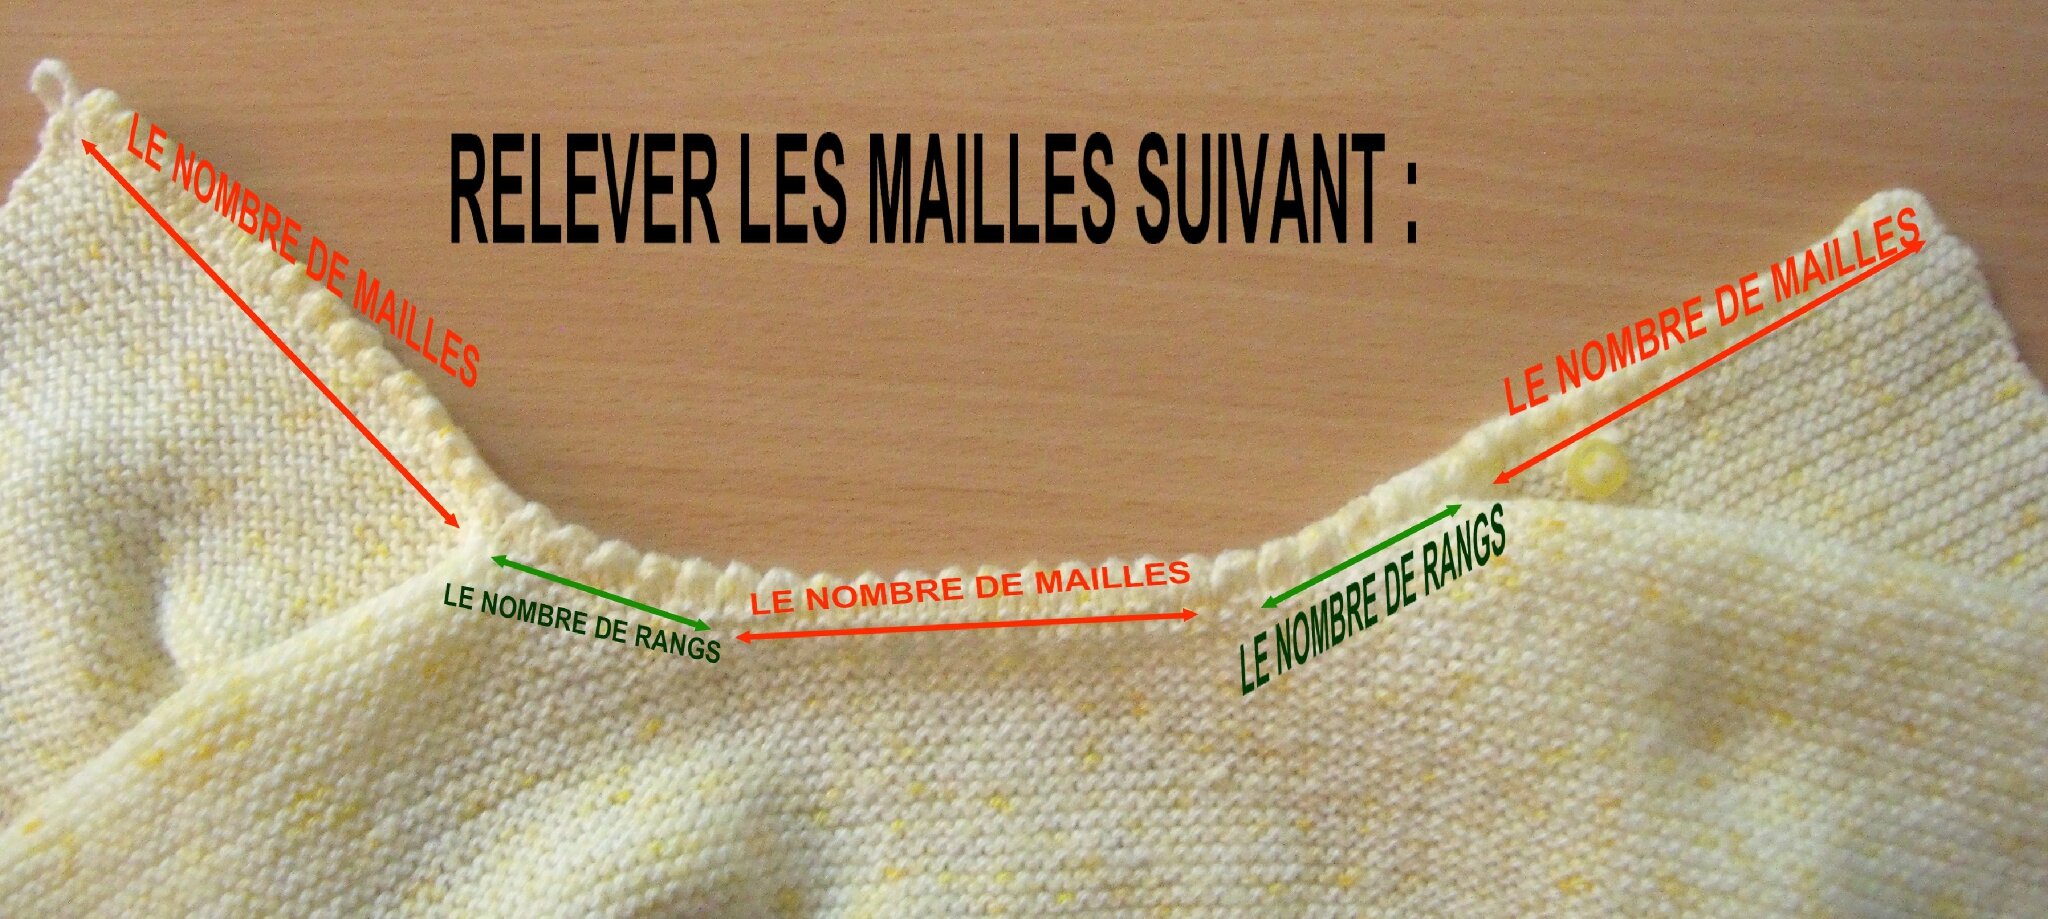 relever mailles